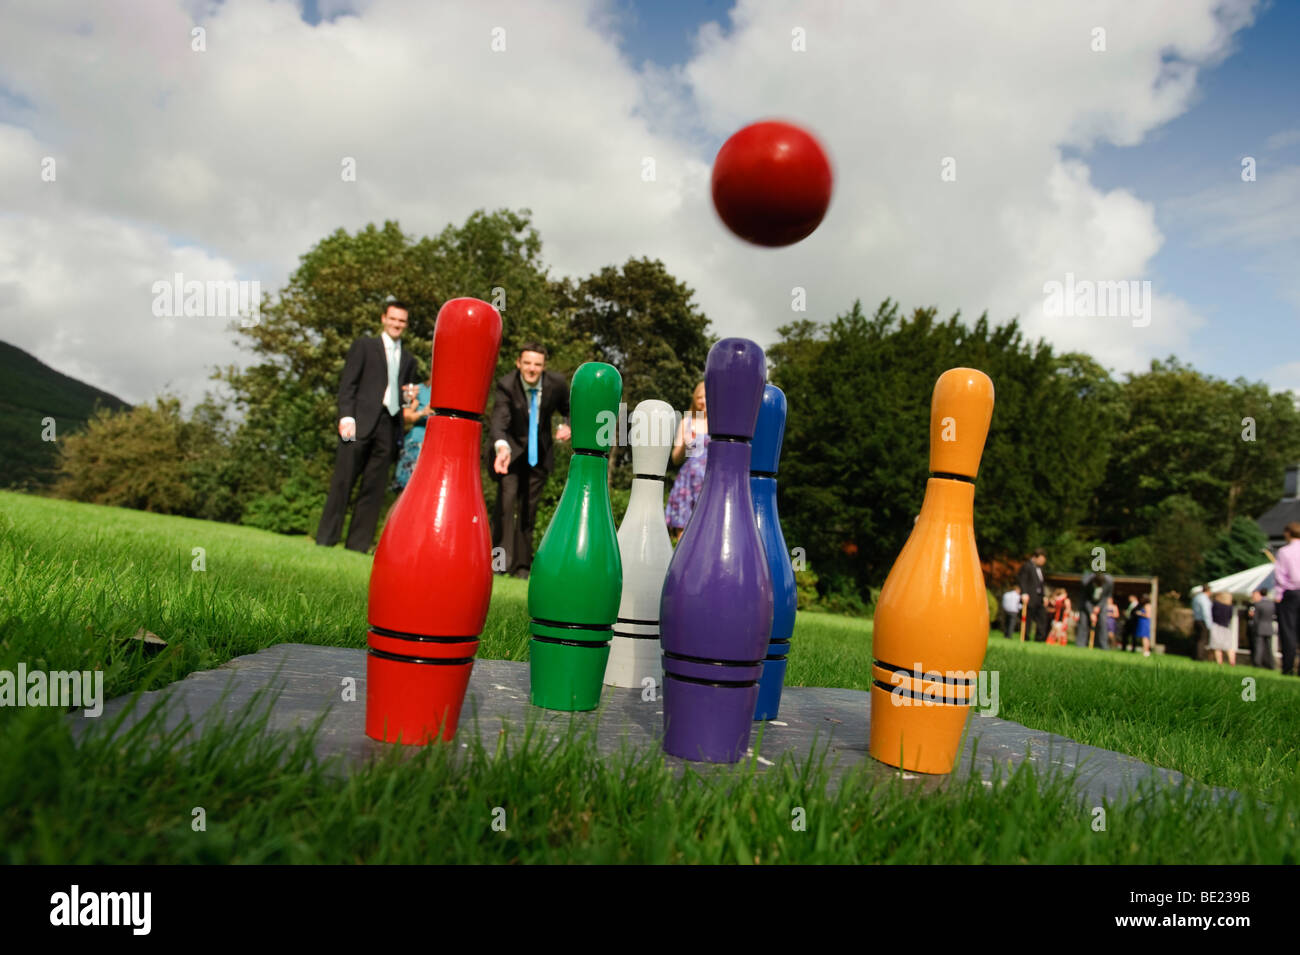 People playing lawn skittles at a wedding reception, UK Stock Photo